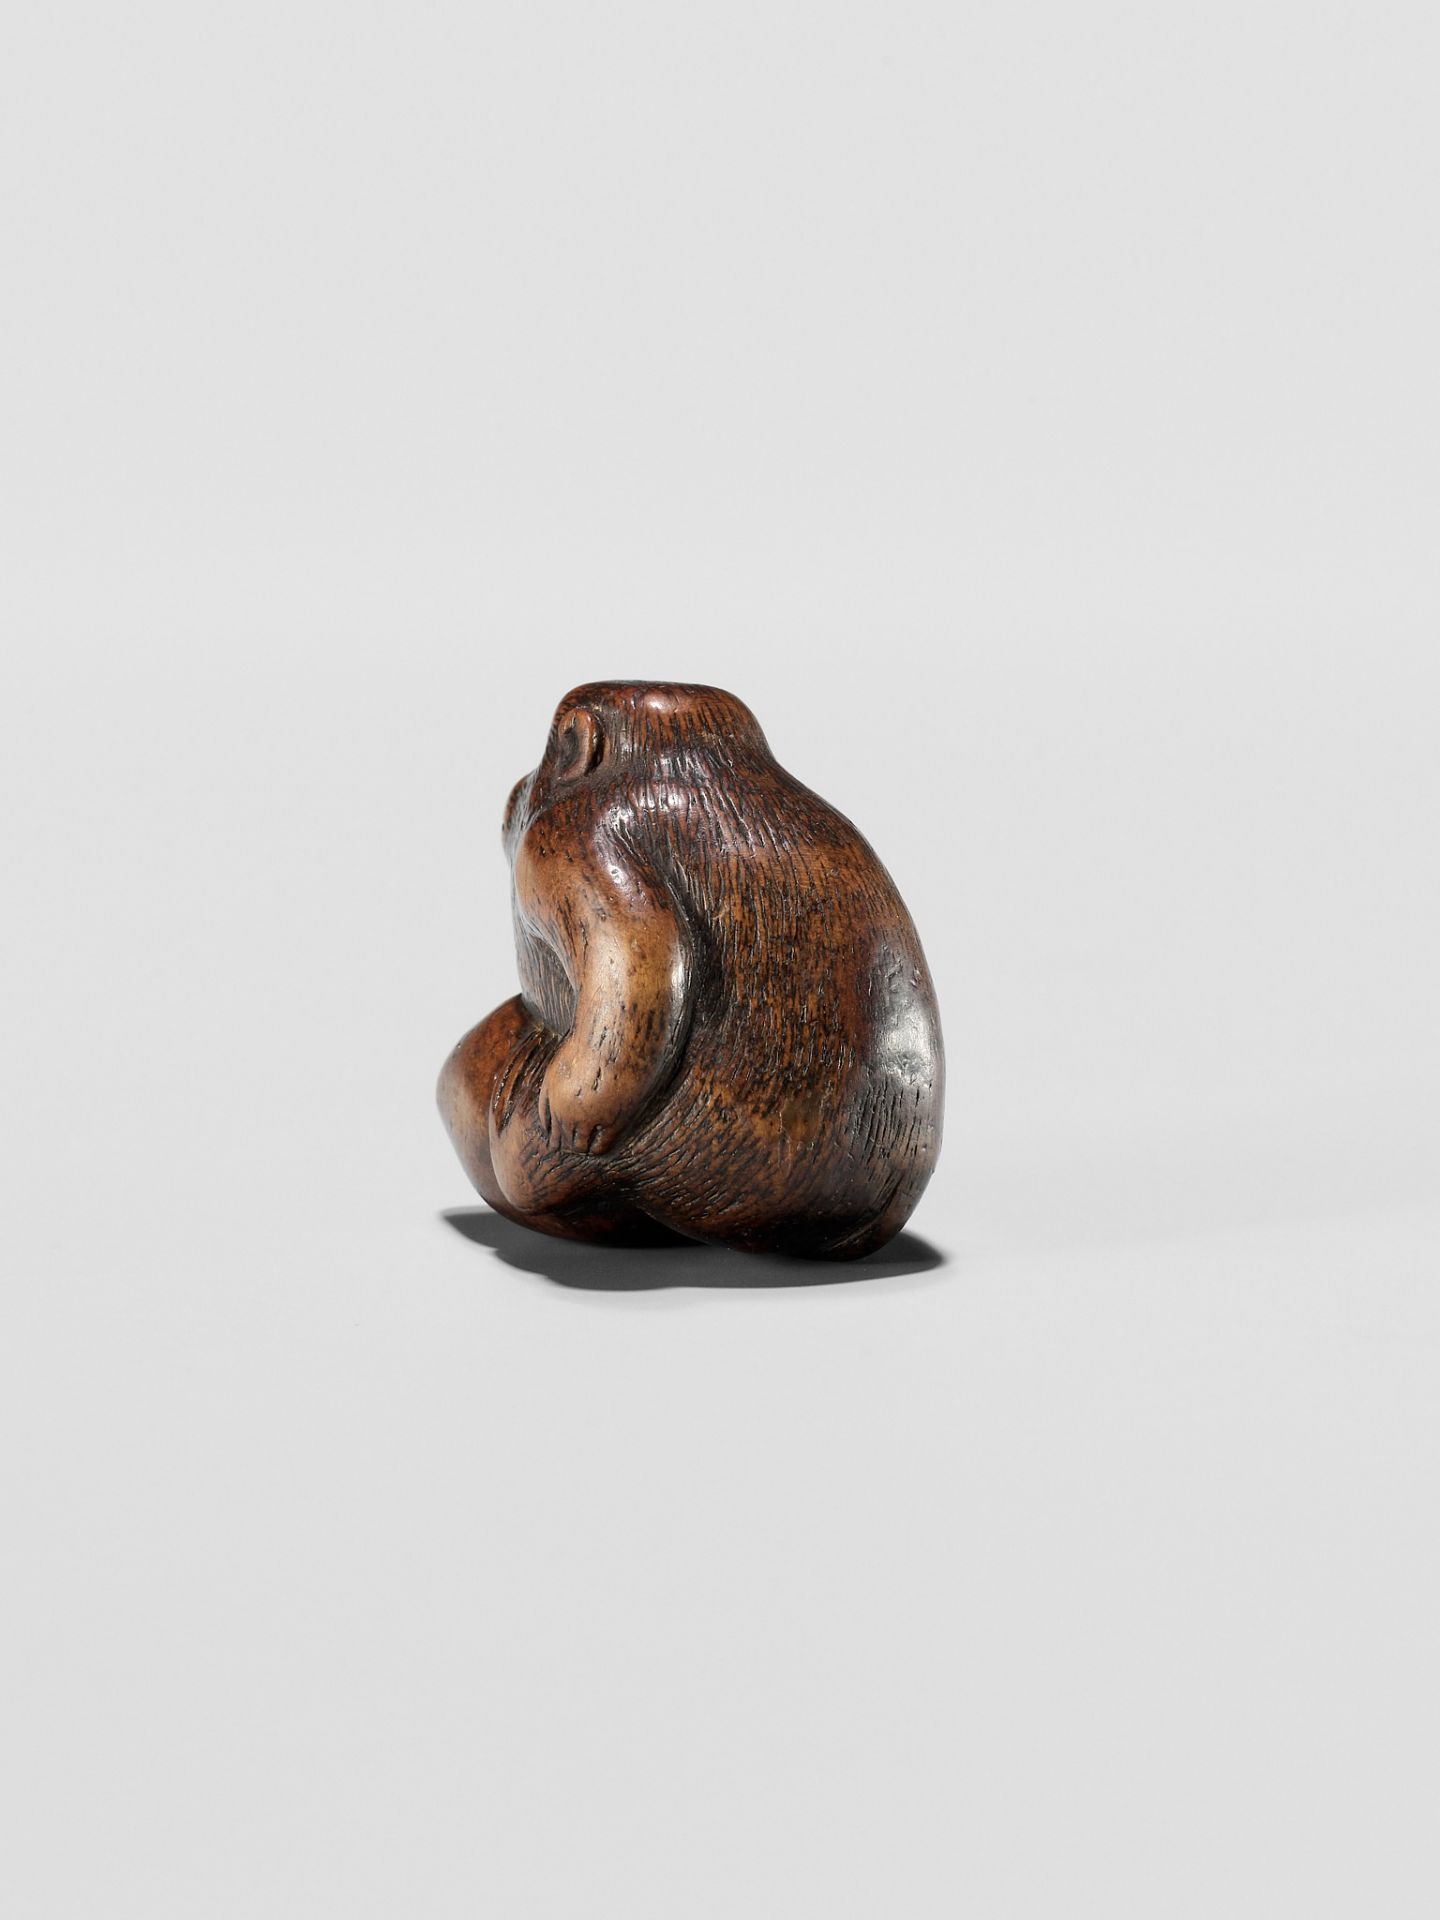 A WOOD NETSUKE OF A MONKEY EATING A PEACH, ATTRIBUTED TO MIWA - Image 7 of 12